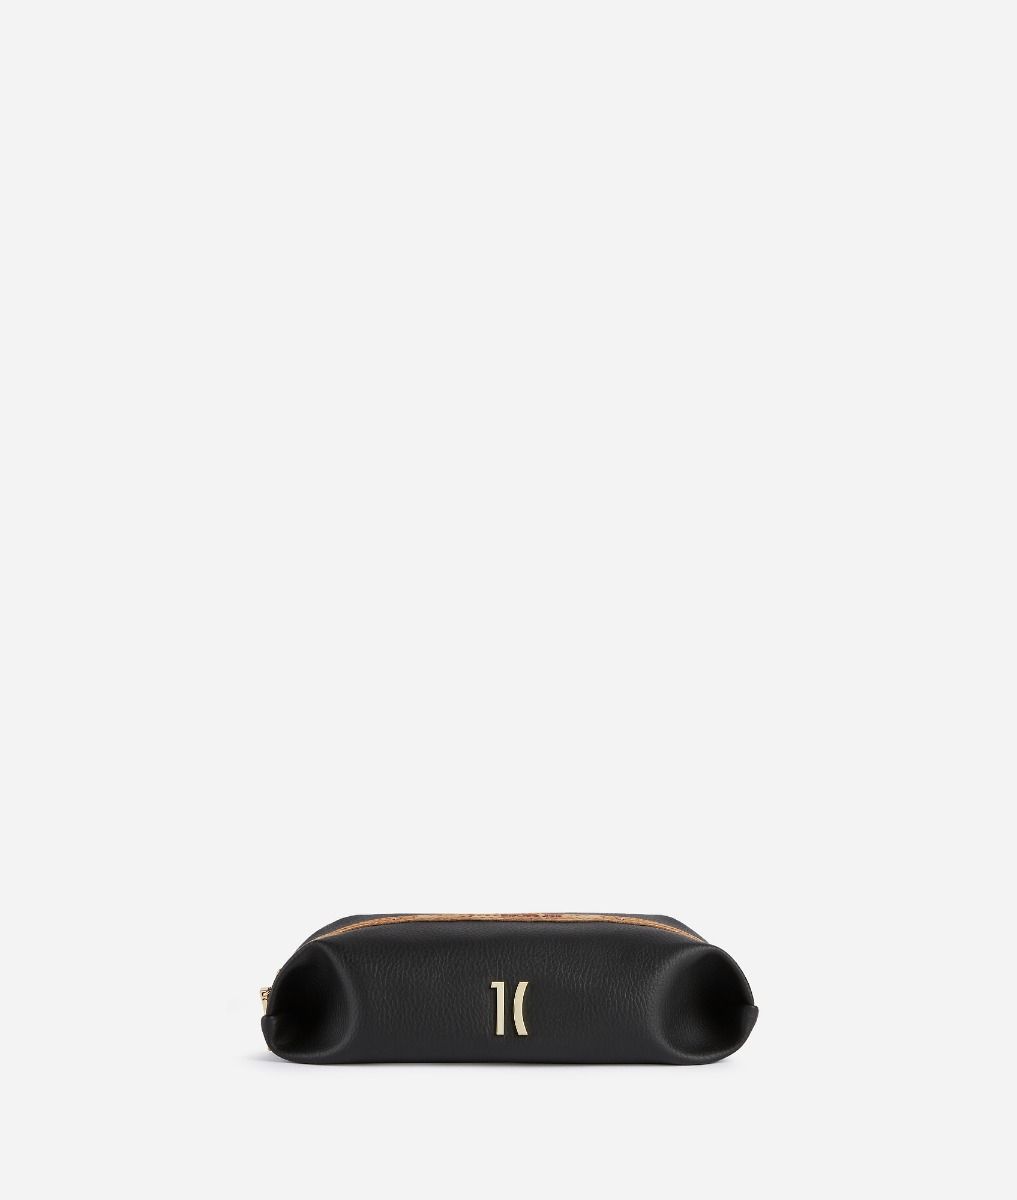 Small clutch bag with logo 1C Black,front